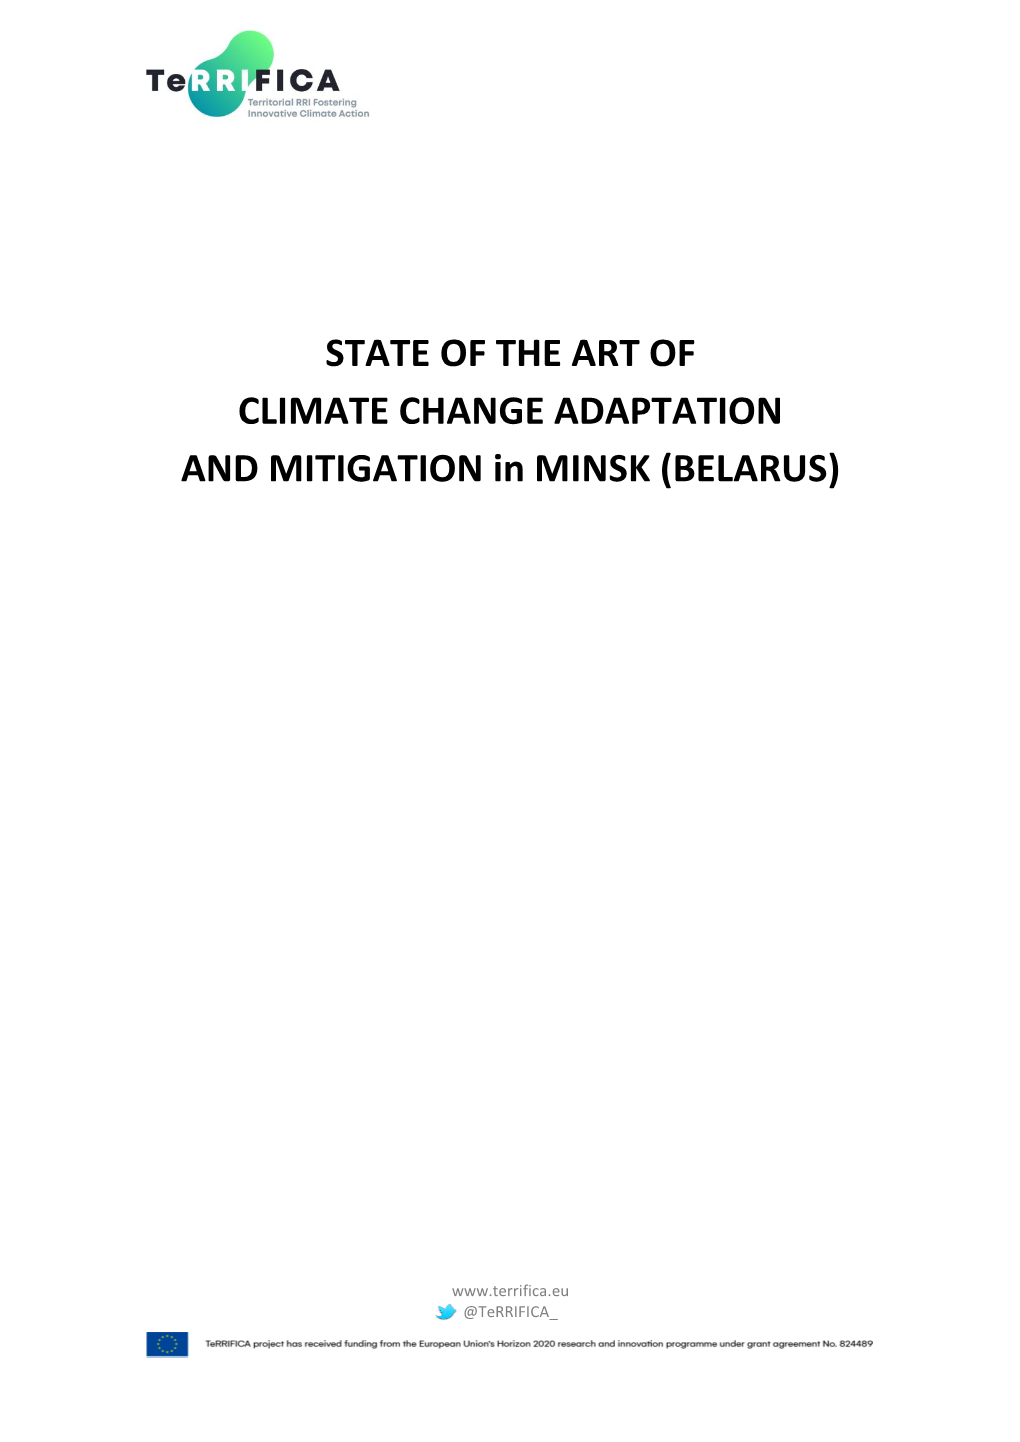 STATE of the ART of CLIMATE CHANGE ADAPTATION and MITIGATION in MINSK (BELARUS)